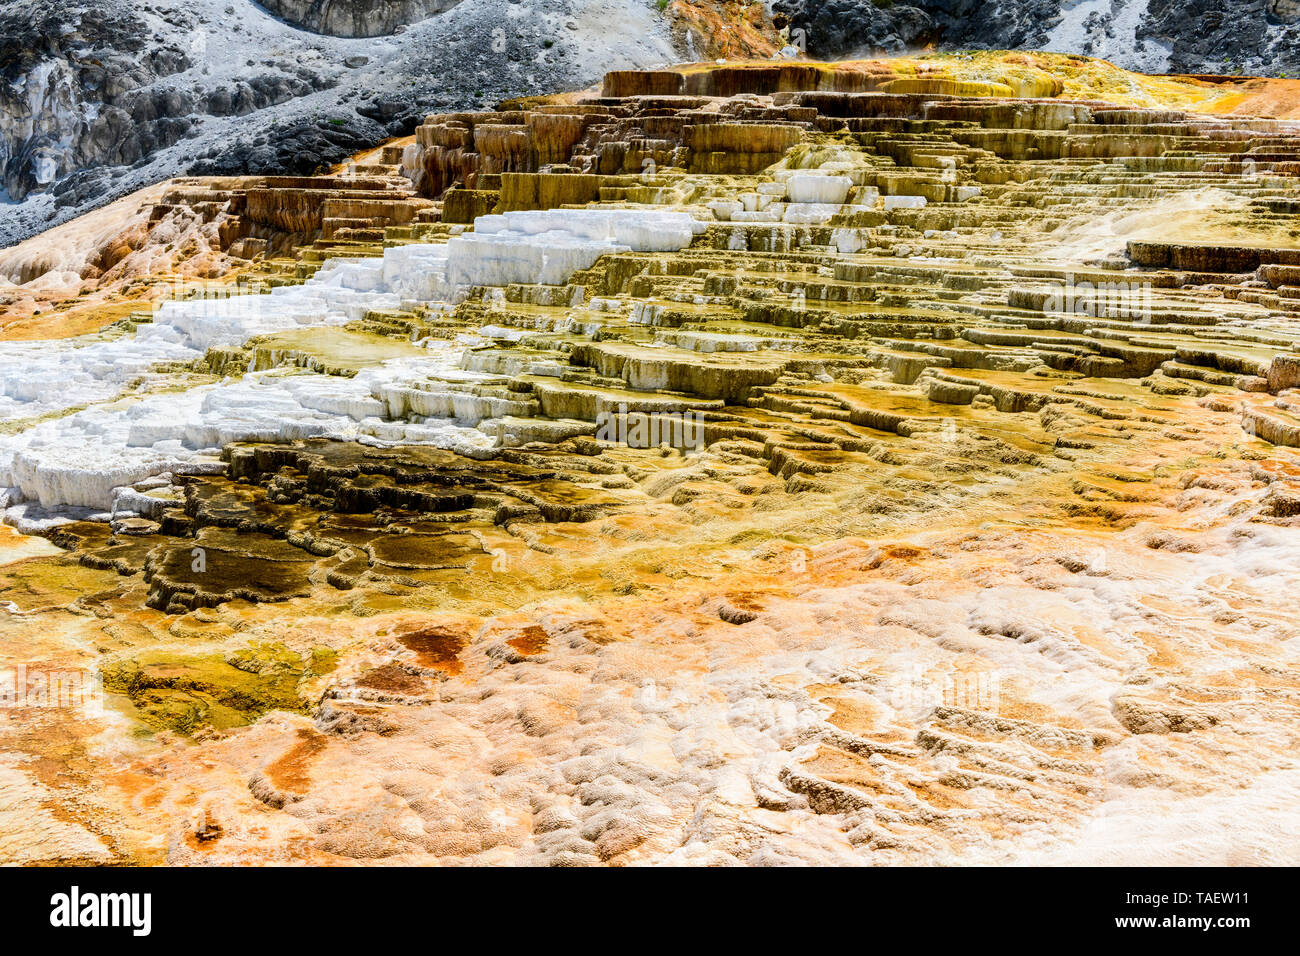 Limestone rock formations at Mammoth Hot Springs in Yellowstone National Park in Wyoming USA. Stock Photo